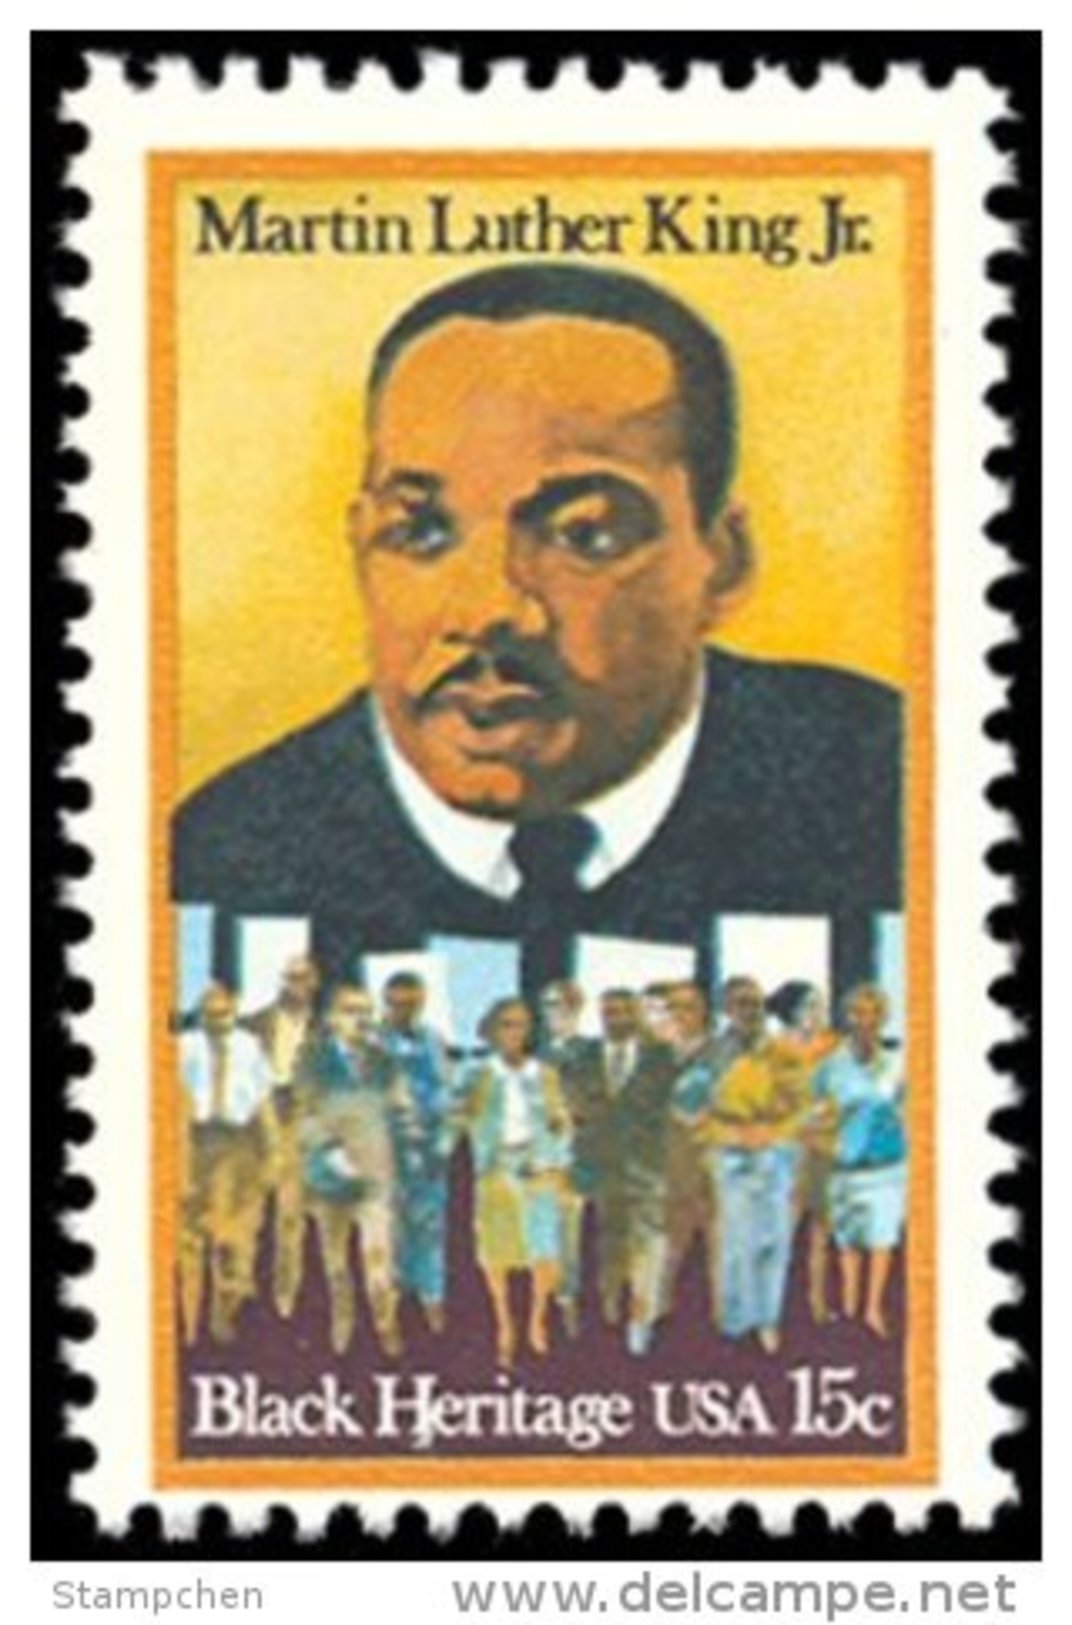 1979 USA Dr. Martin Luther King Jr. Stamp Sc#1771 Famous Black Heritage Civil Right - Martin Luther King